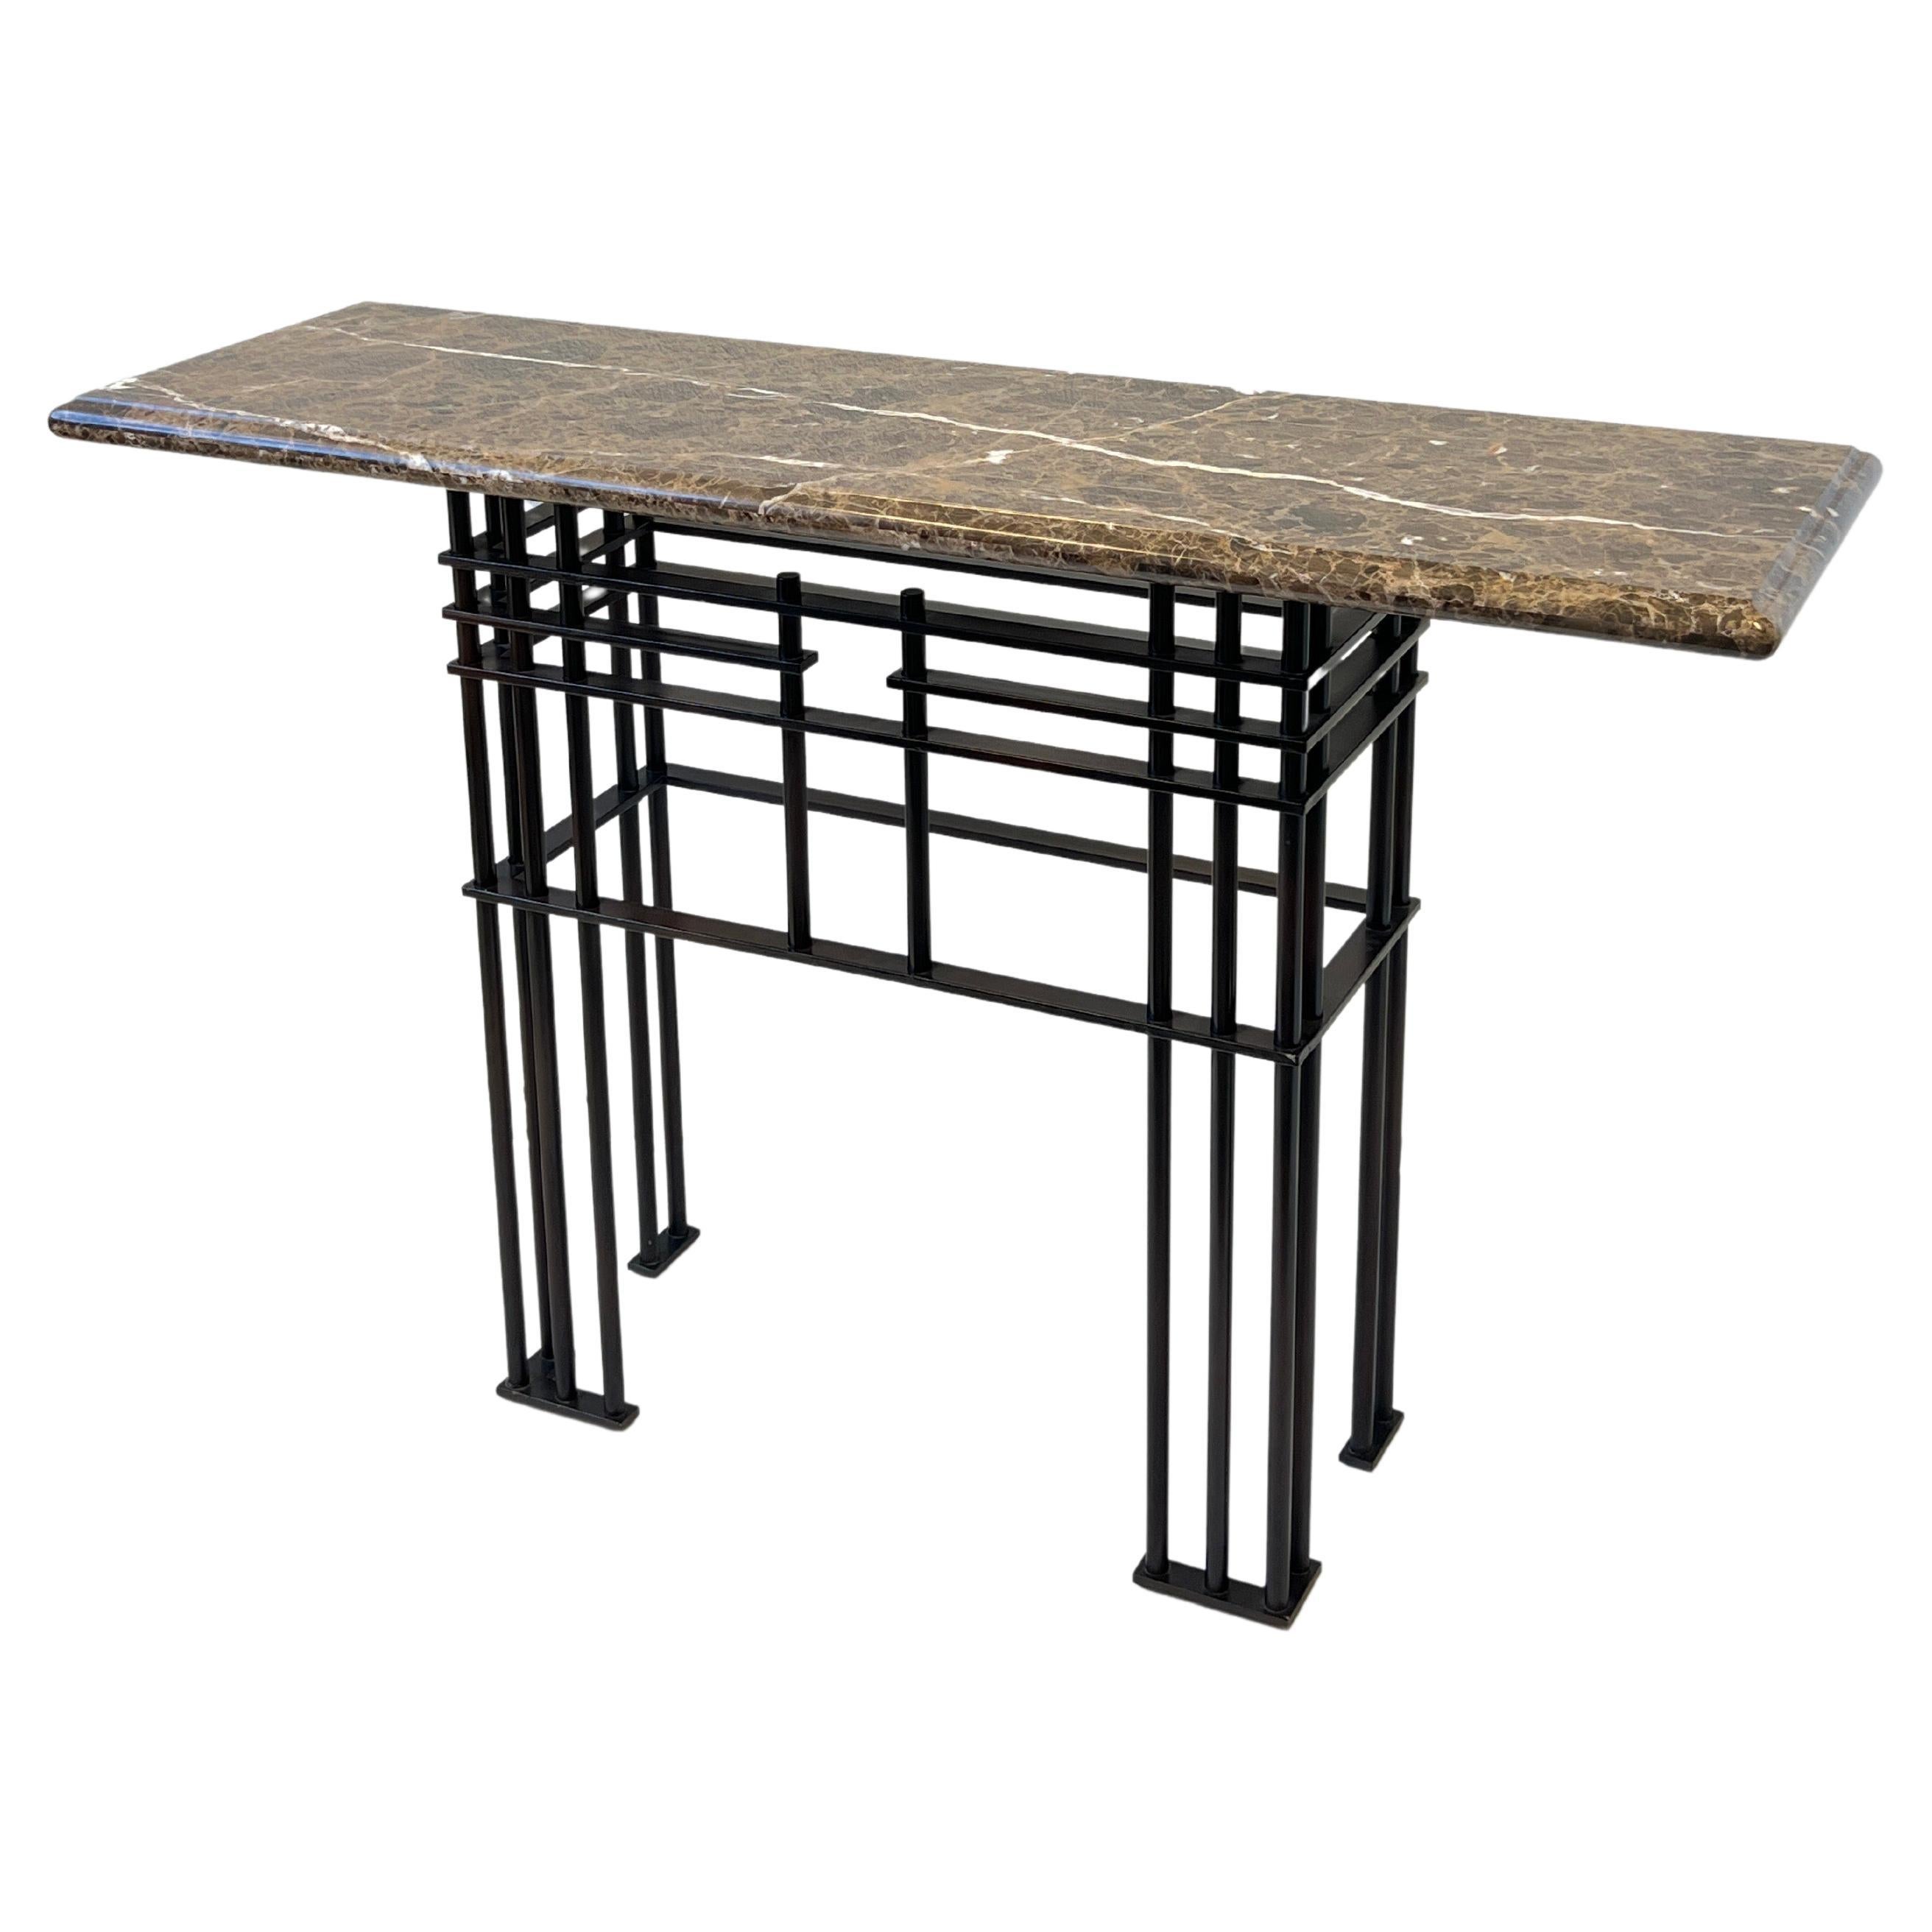 Marble and Bronze Powder Coated Console Table by Jean Michael Wilmotte for Mirak For Sale